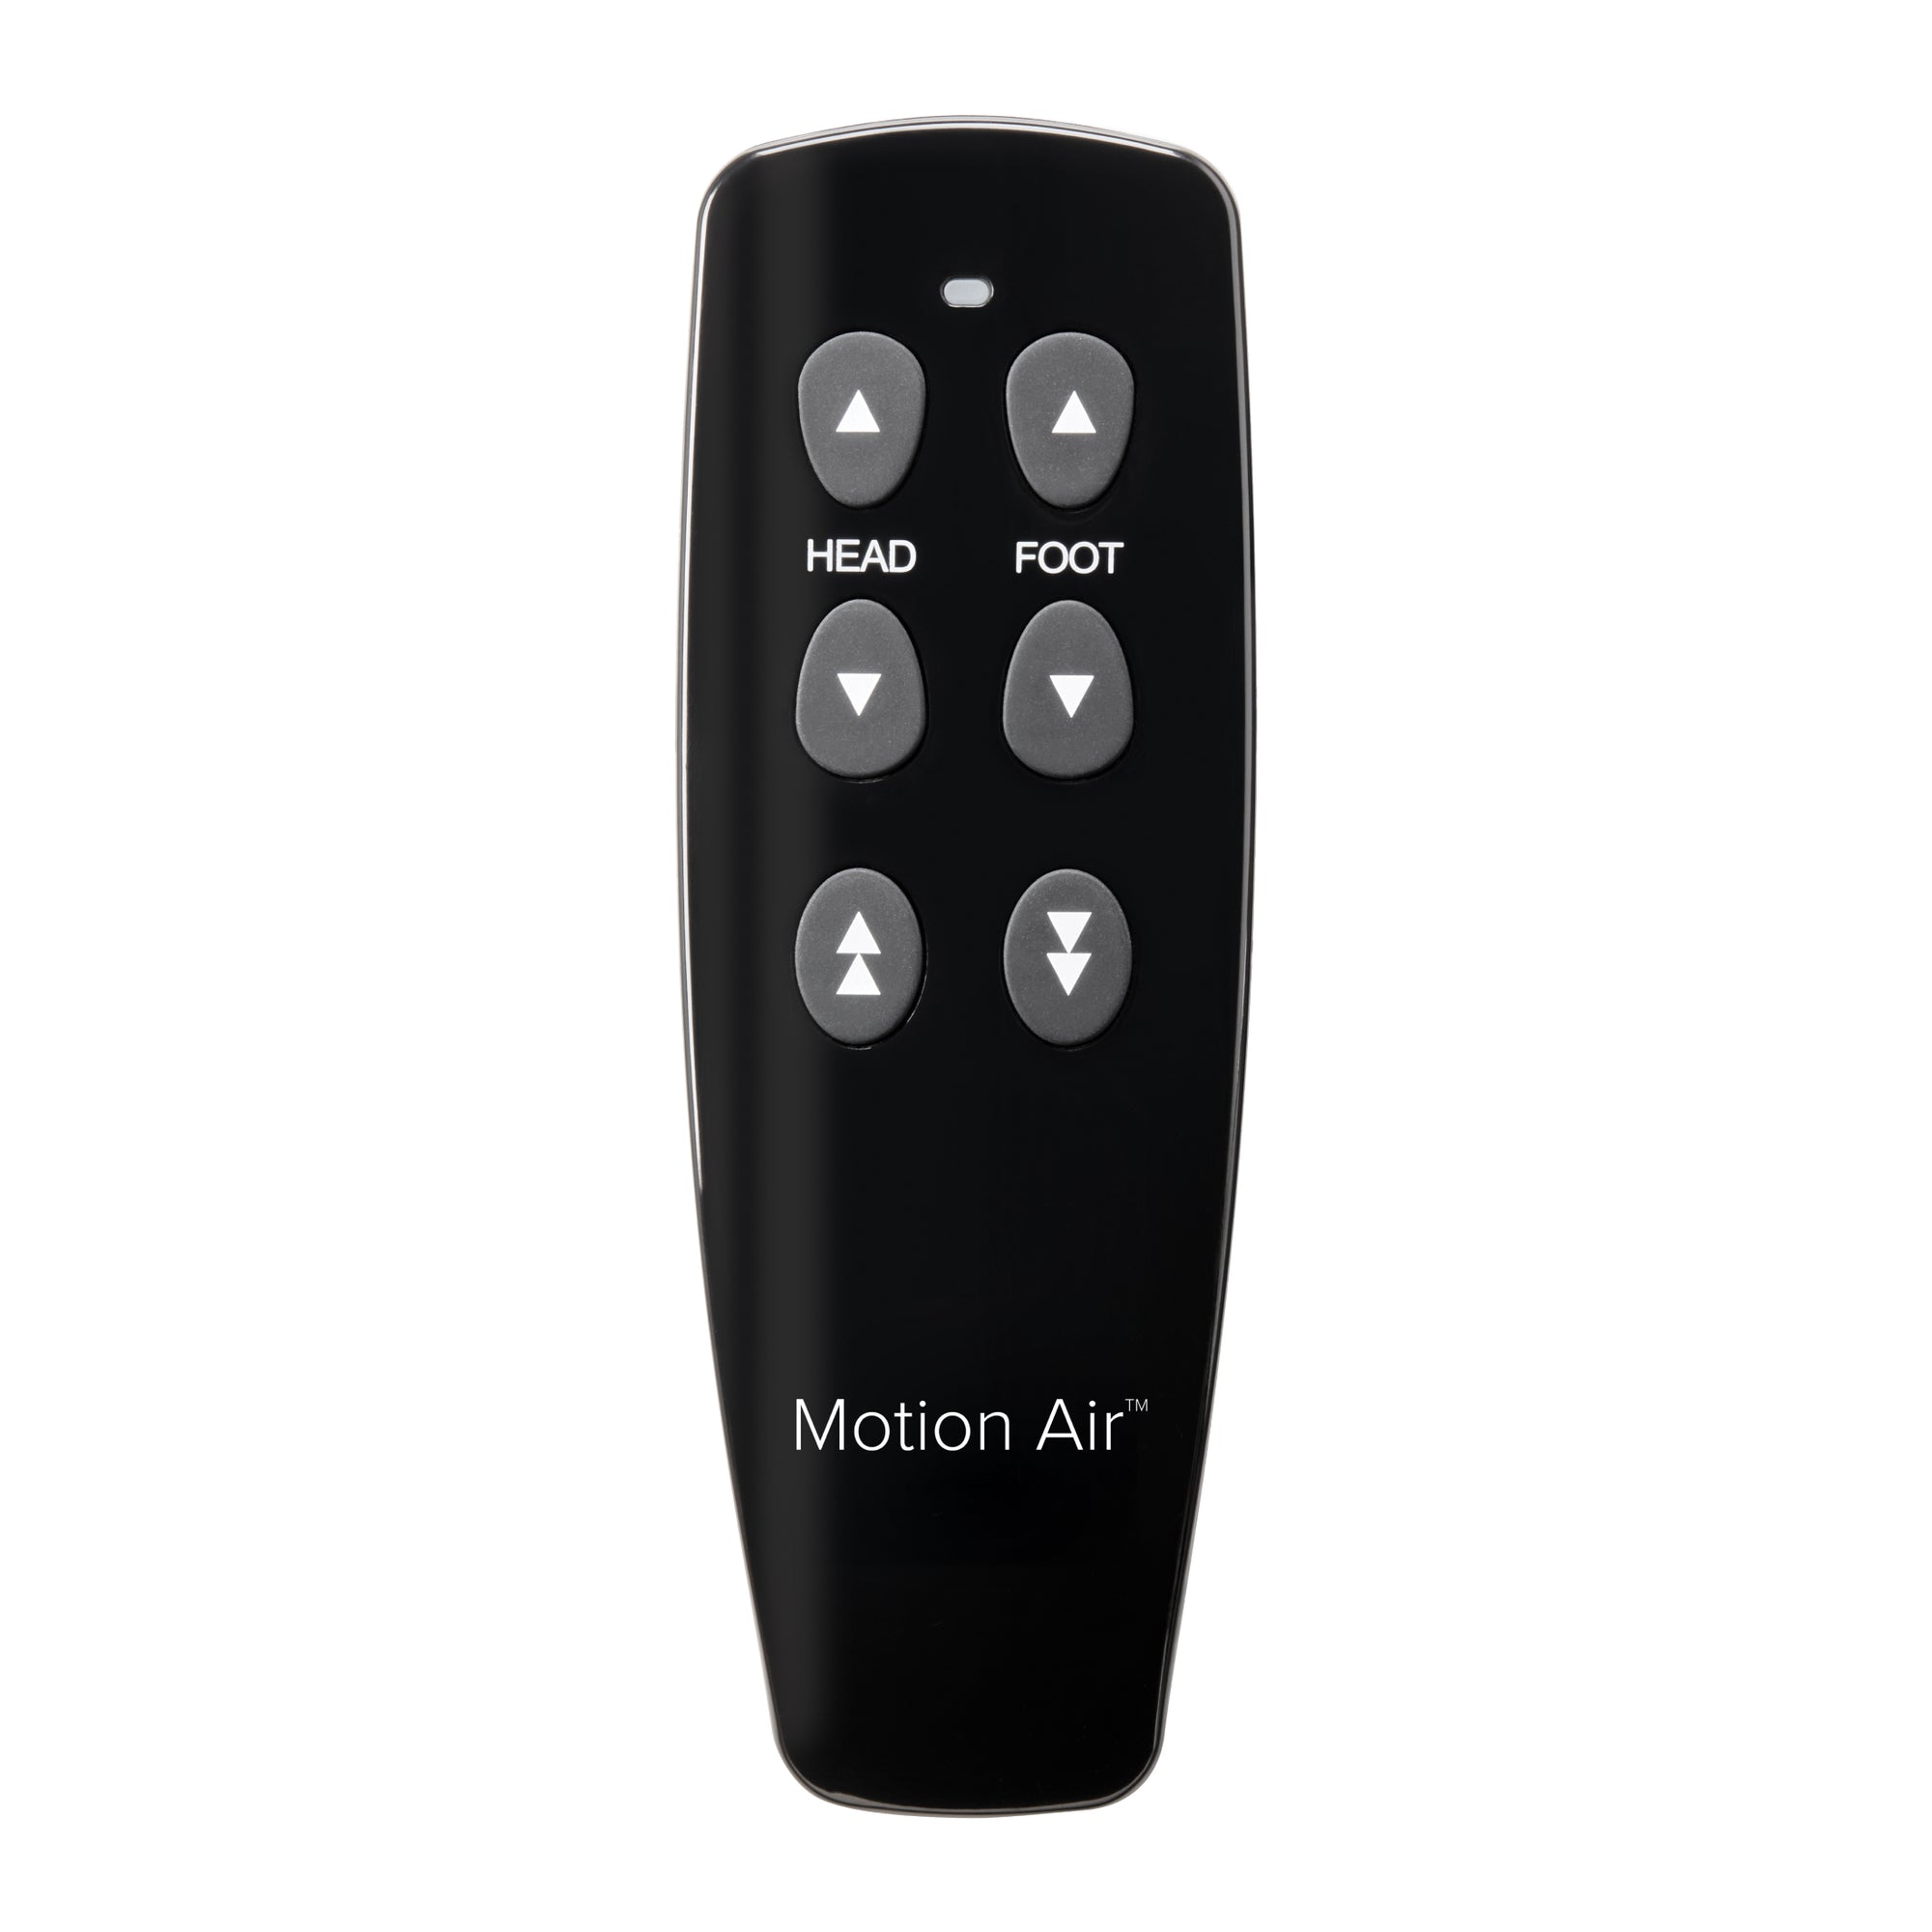 Cloes-up view of the remote control for the Beautyrest Motion Air adjustable base